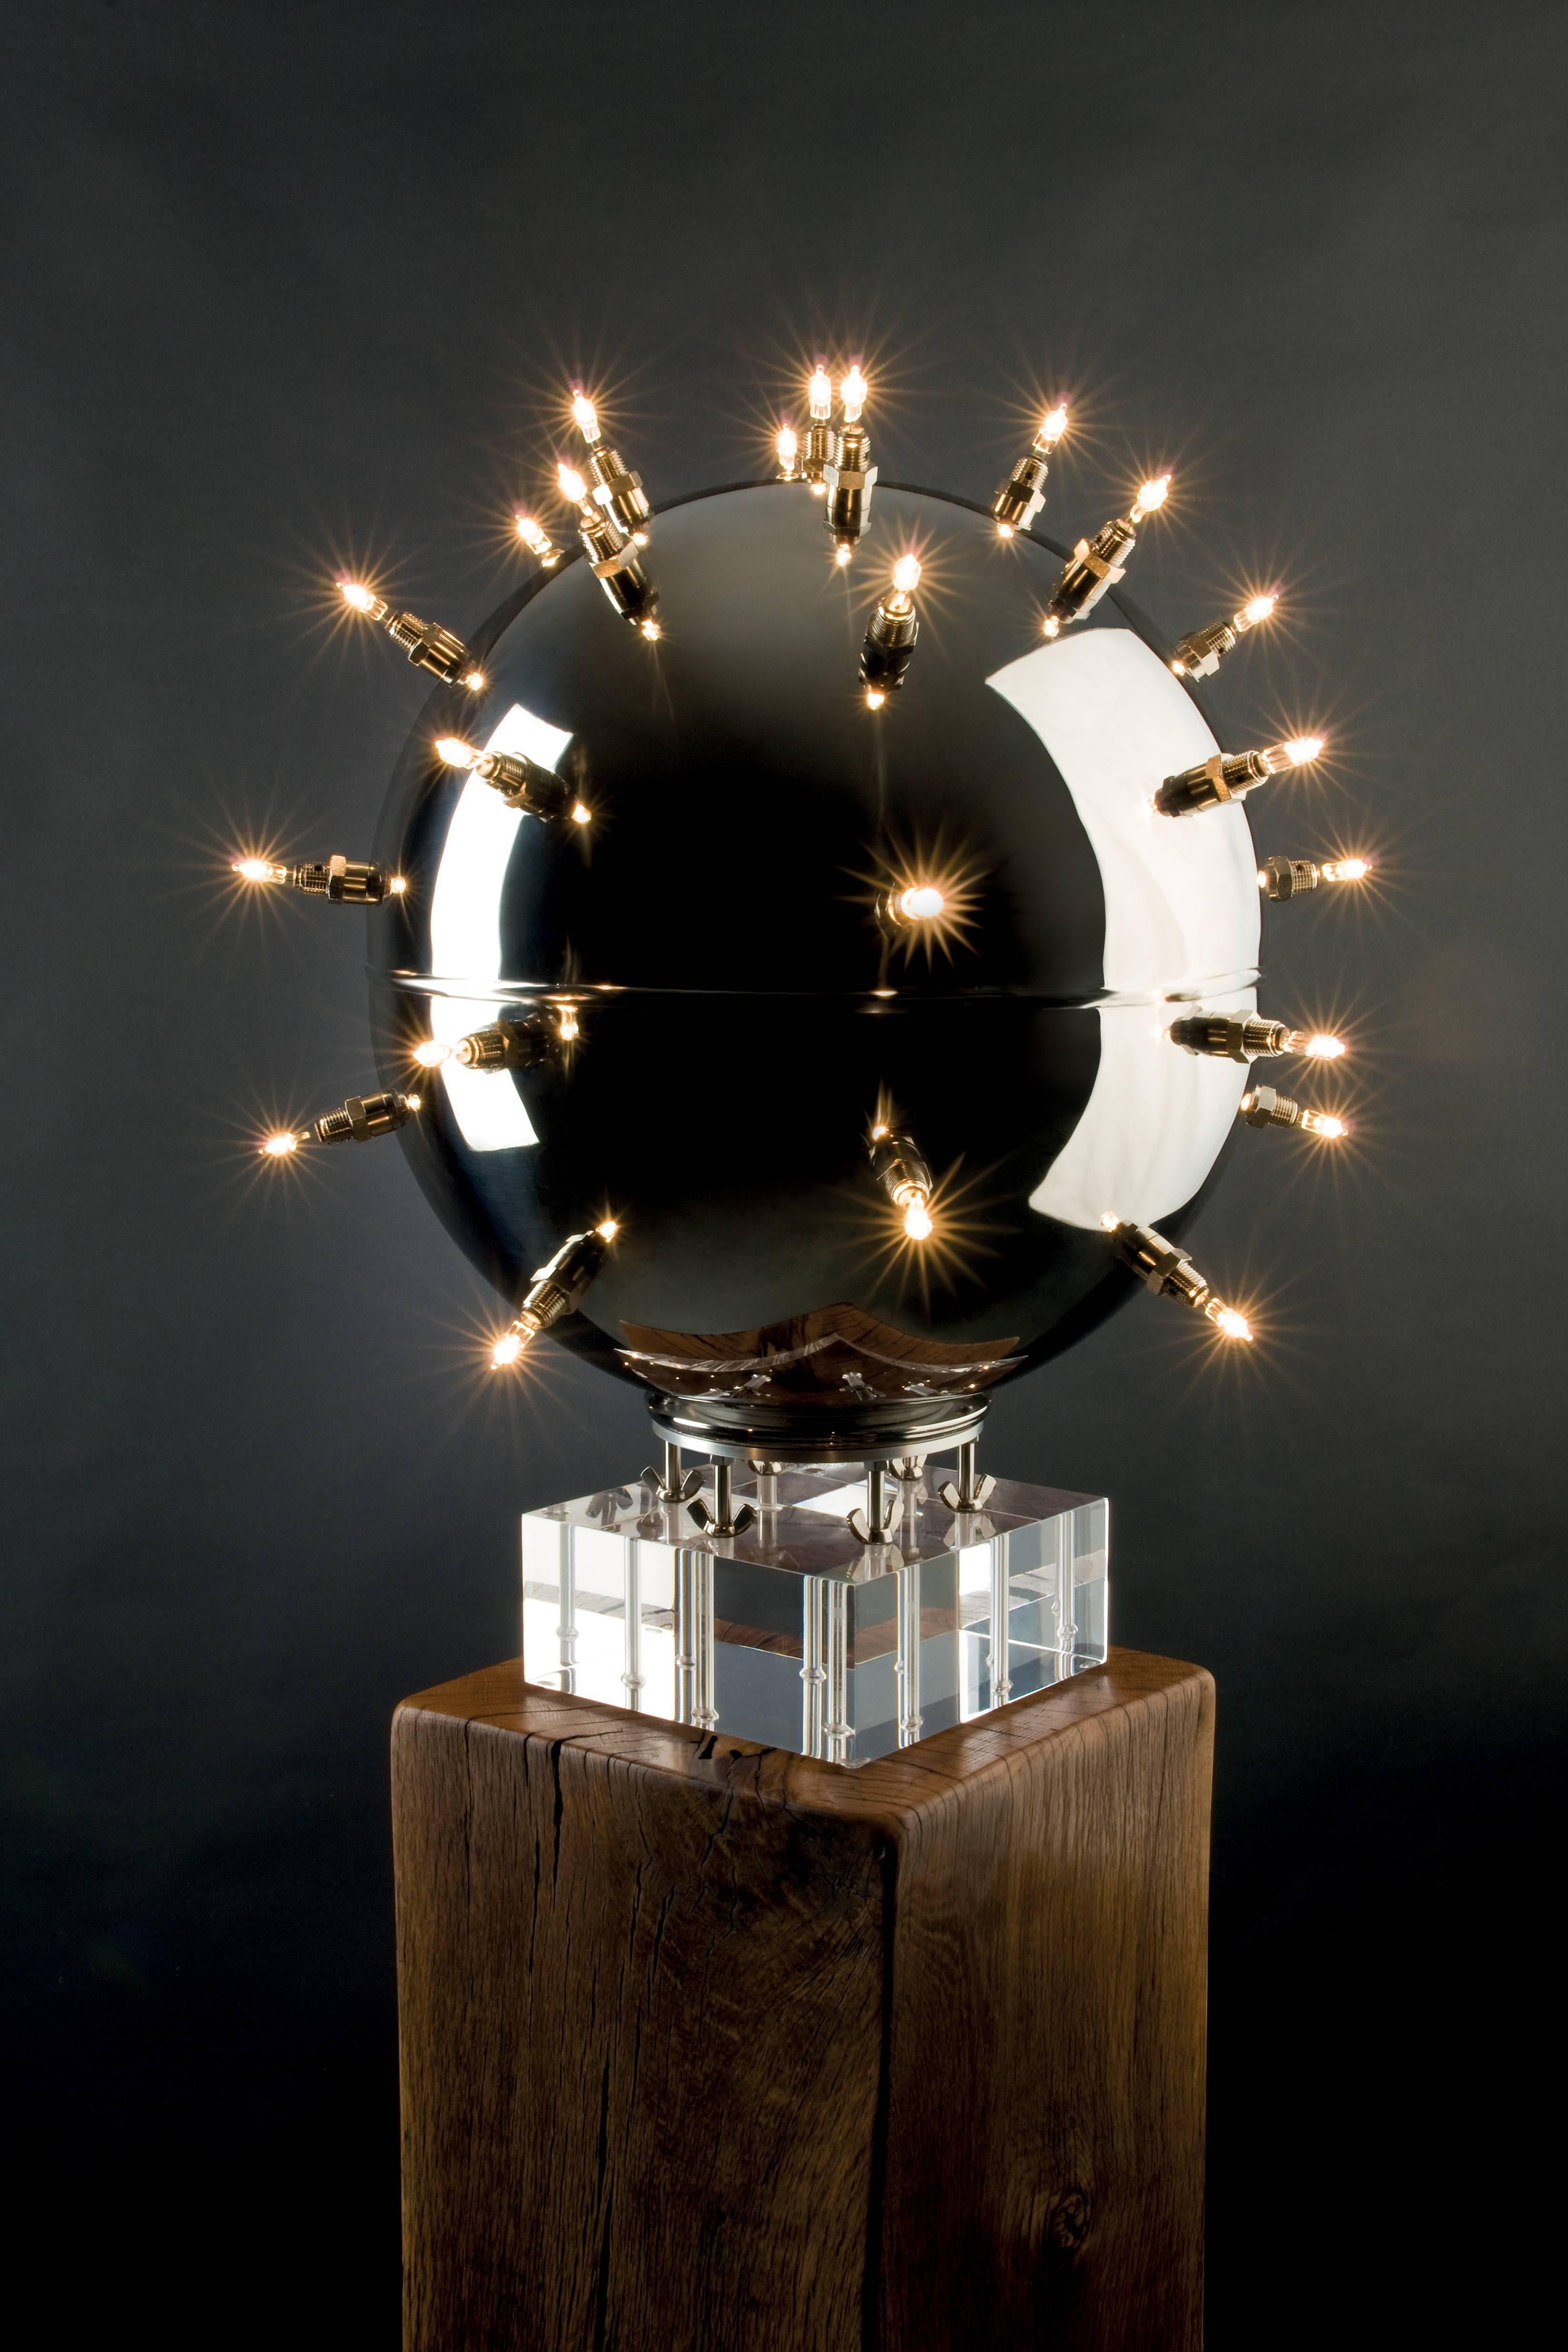 The table lamp 'BeMine 33' is composed of a sphere in mirror polished stainless steel and 33 sources of illumination. The highly polished stainless steel allows interesting games of reflection on the surface of the sphere, this also appears when the